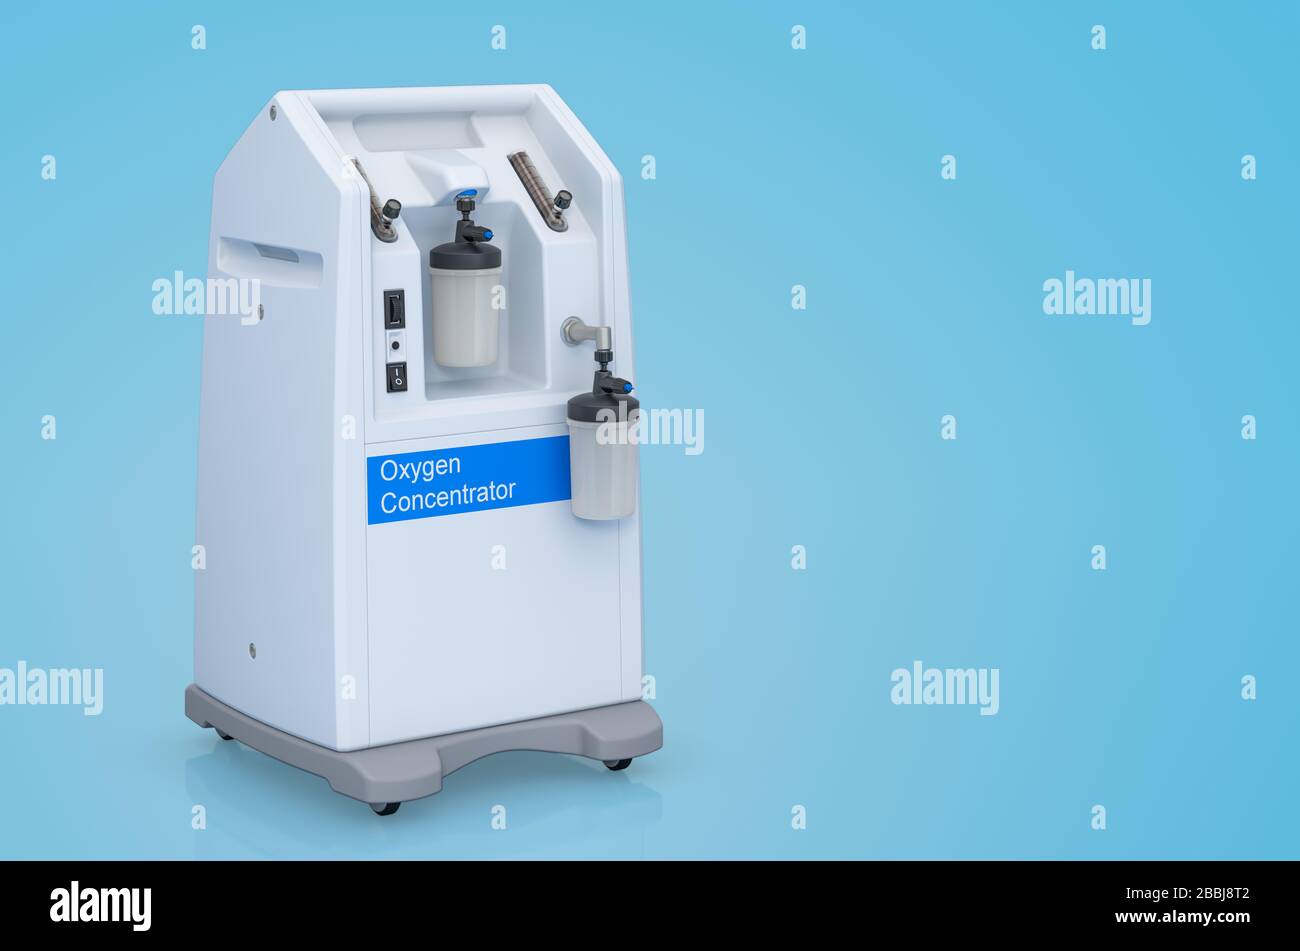 Portable Oxygen Concentrator on blue background, 3D rendering Stock Photo